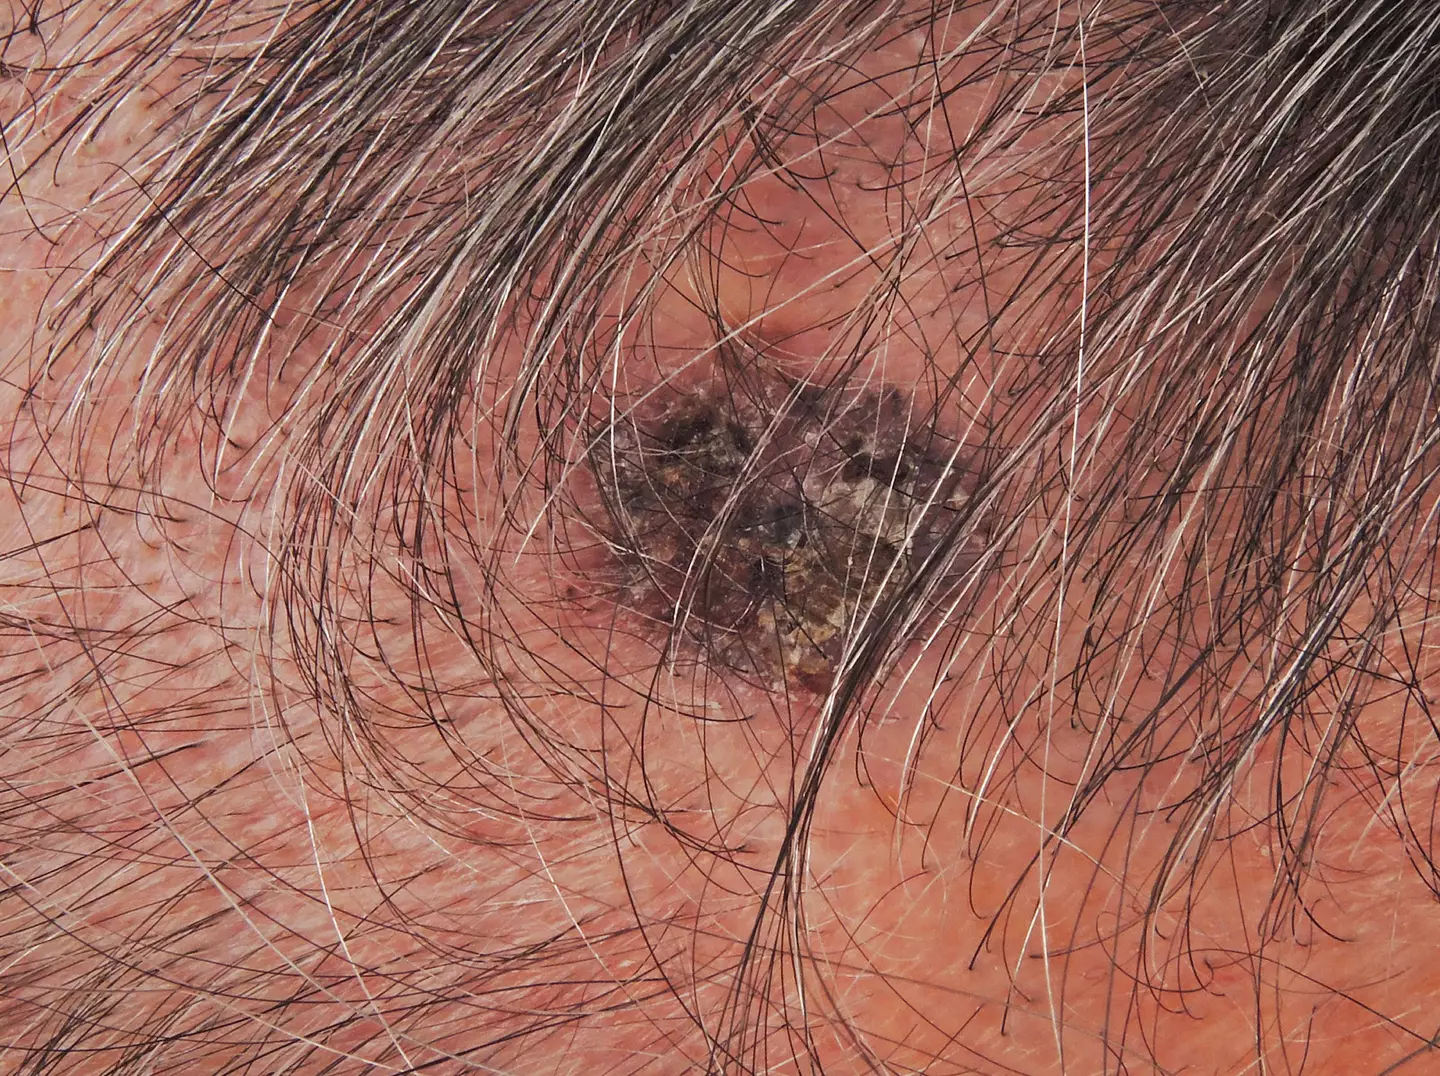 This type of skin cancer can appear as a freckle.